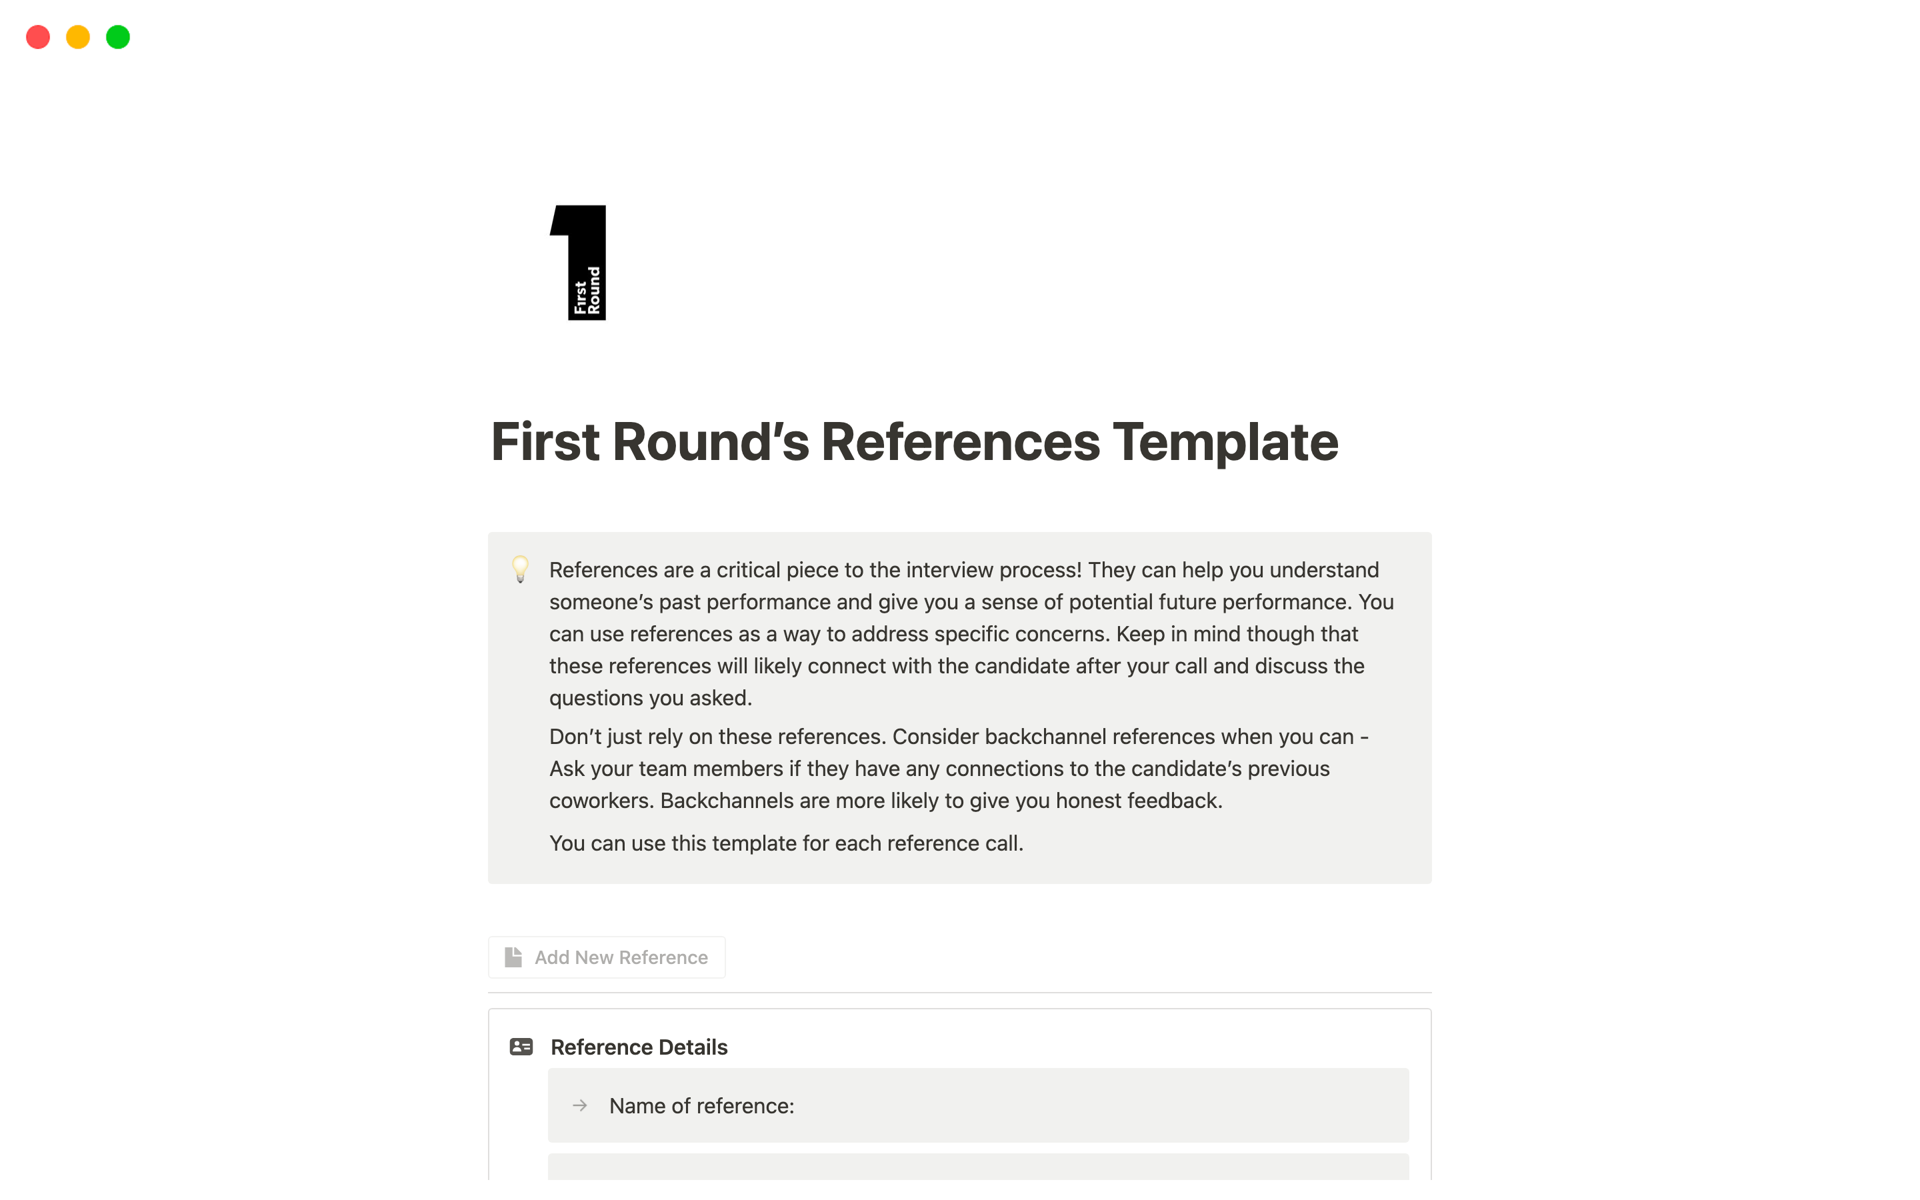 Efficiently assess candidates through structured reference calls with this template.